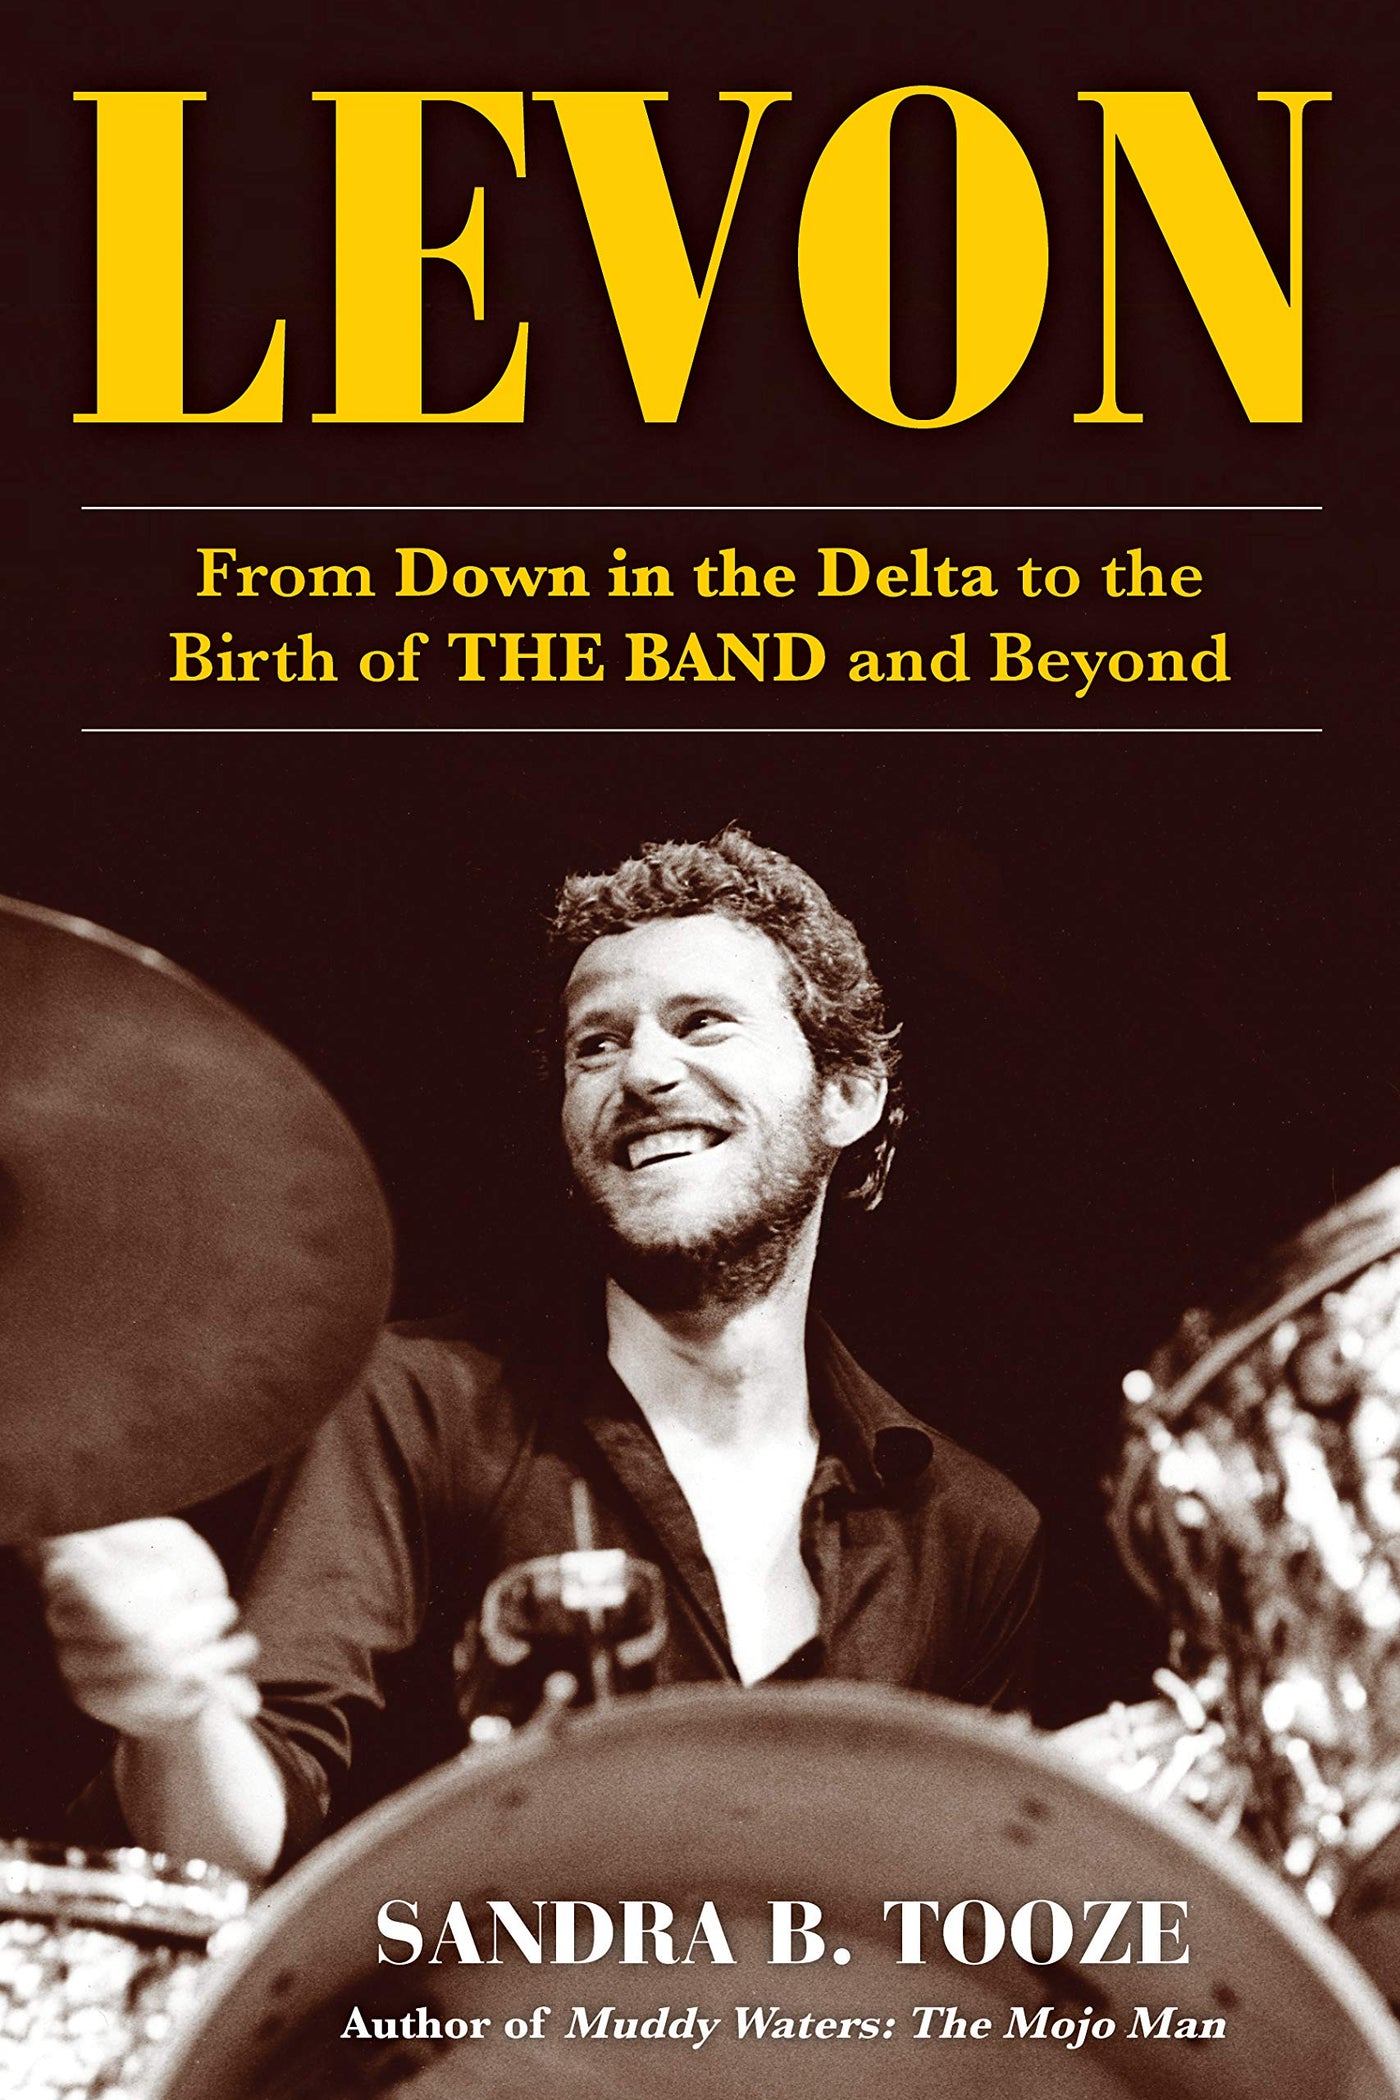 Levon: From Down in the Delta to the Birth of the Band and Beyond by Sandra B. Tooze